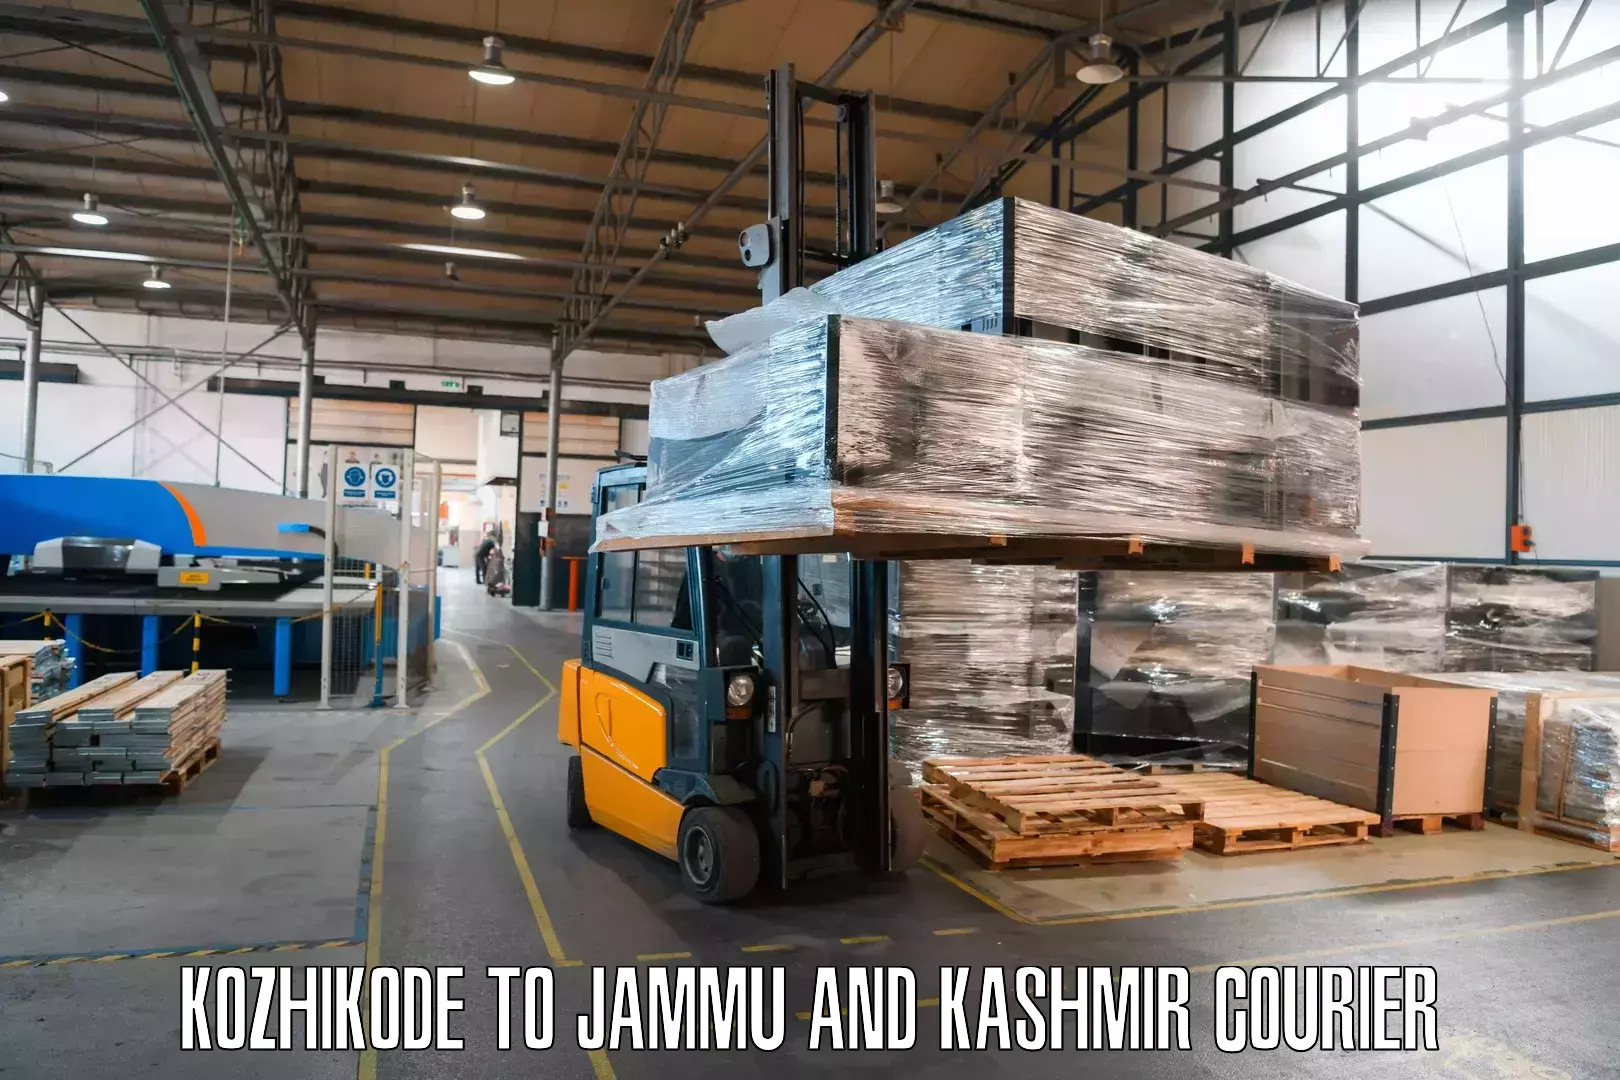 Flexible delivery scheduling Kozhikode to Shopian